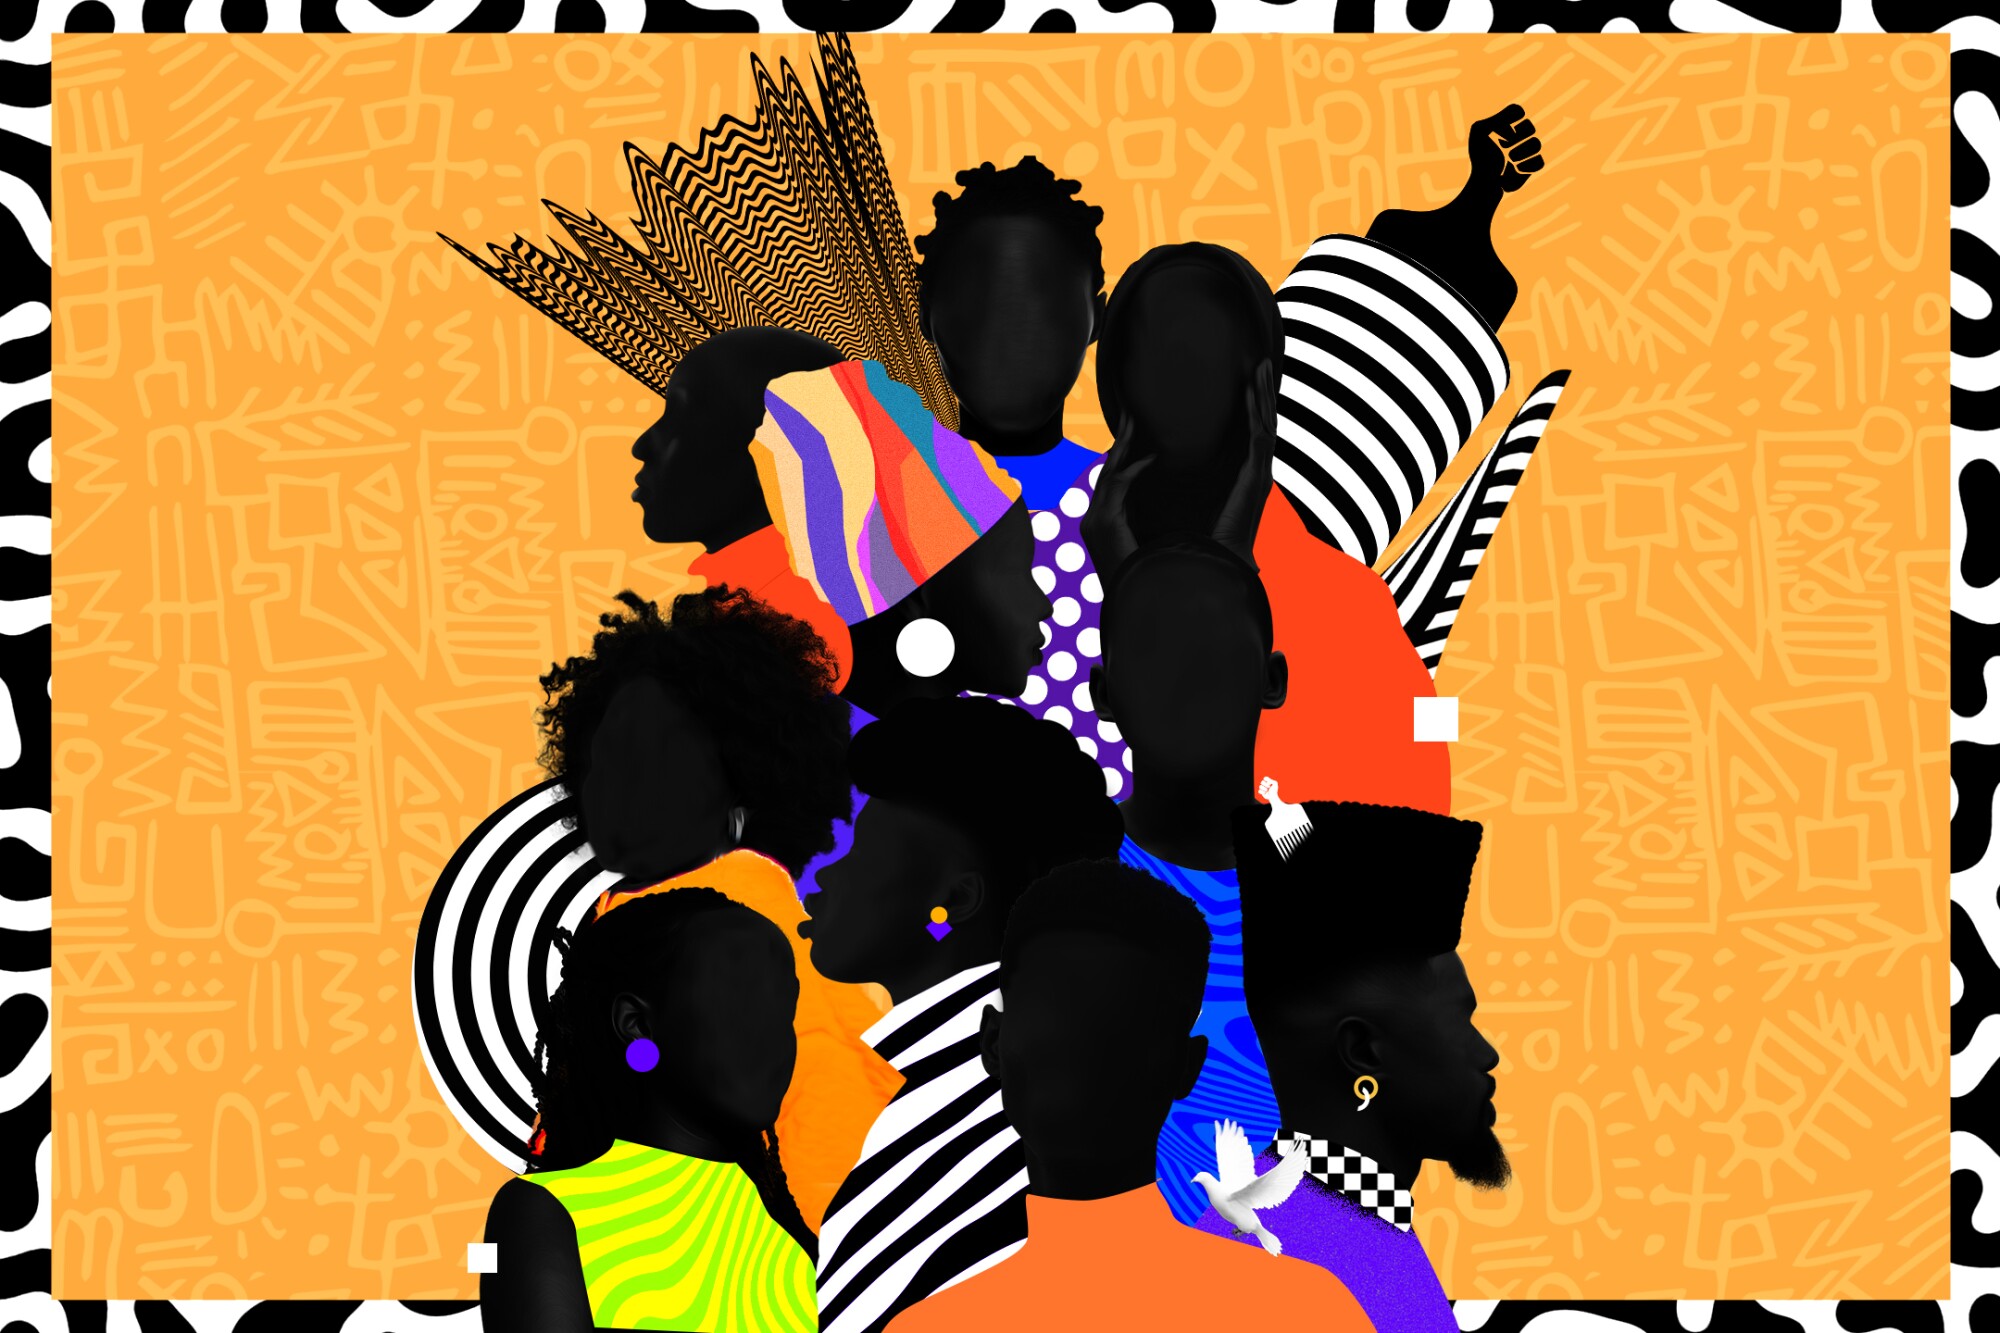 A colorful illustration featuring silhouettes of Black people